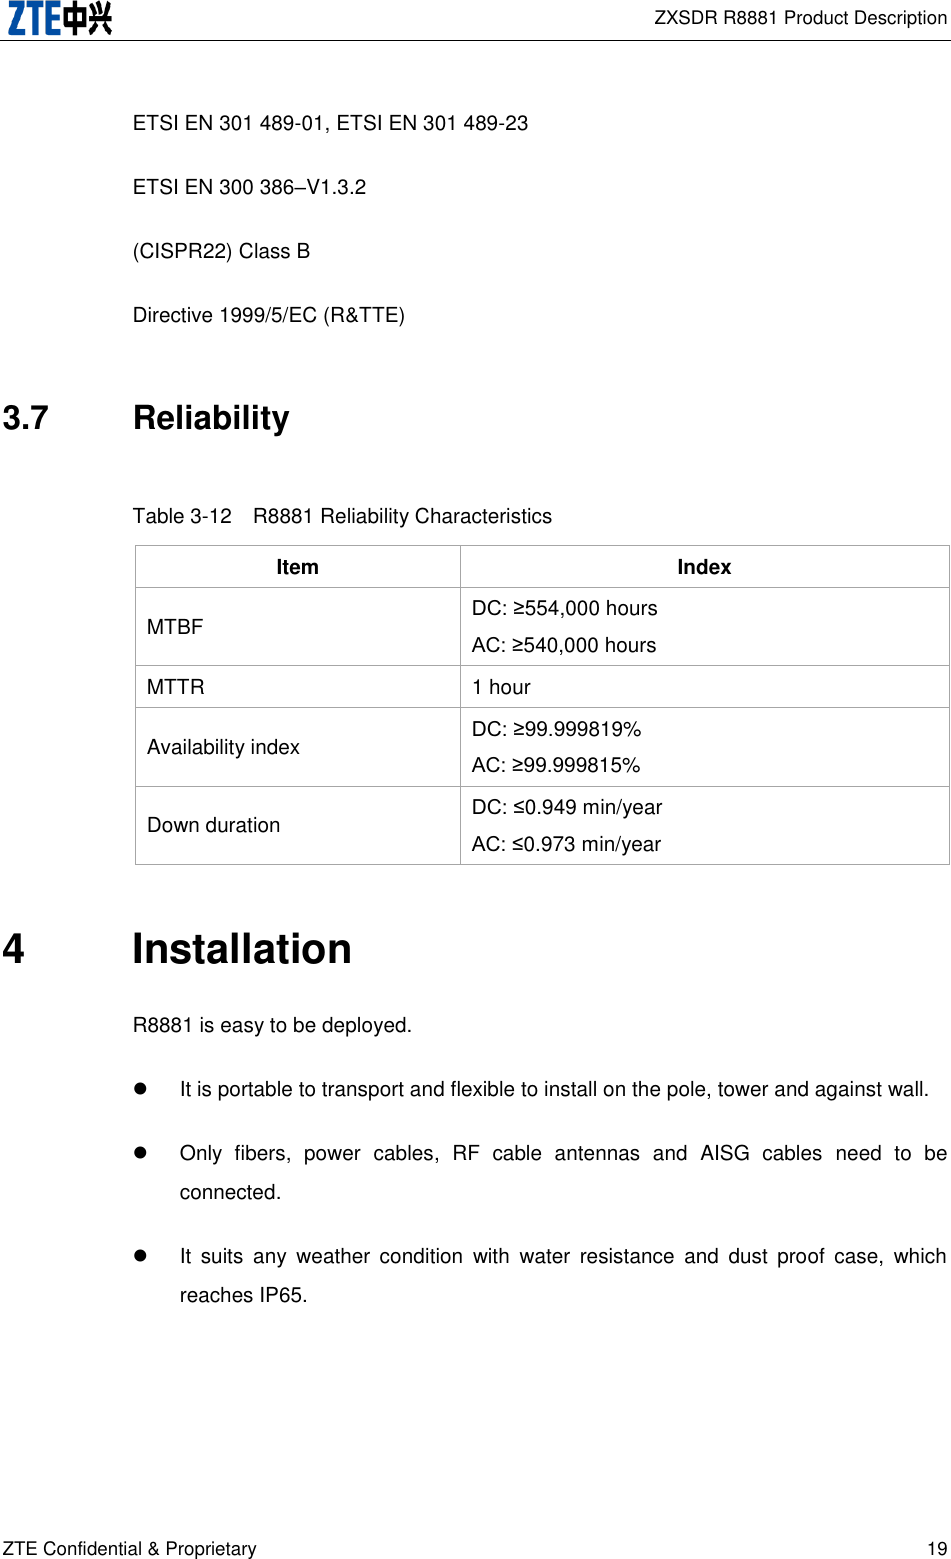  ZXSDR R8881 Product Description ZTE Confidential &amp; Proprietary 19 ETSI EN 301 489-01, ETSI EN 301 489-23 ETSI EN 300 386–V1.3.2 (CISPR22) Class B Directive 1999/5/EC (R&amp;TTE) 3.7  Reliability Table 3-12  R8881 Reliability Characteristics Item Index MTBF DC: ≥554,000 hours AC: ≥540,000 hours MTTR 1 hour Availability index DC: ≥99.999819% AC: ≥99.999815% Down duration DC: ≤0.949 min/year AC: ≤0.973 min/year 4  Installation R8881 is easy to be deployed.     It is portable to transport and flexible to install on the pole, tower and against wall.   Only  fibers,  power  cables,  RF  cable  antennas  and  AISG  cables  need  to  be connected.   It  suits  any  weather  condition  with  water  resistance  and  dust  proof  case,  which reaches IP65. 